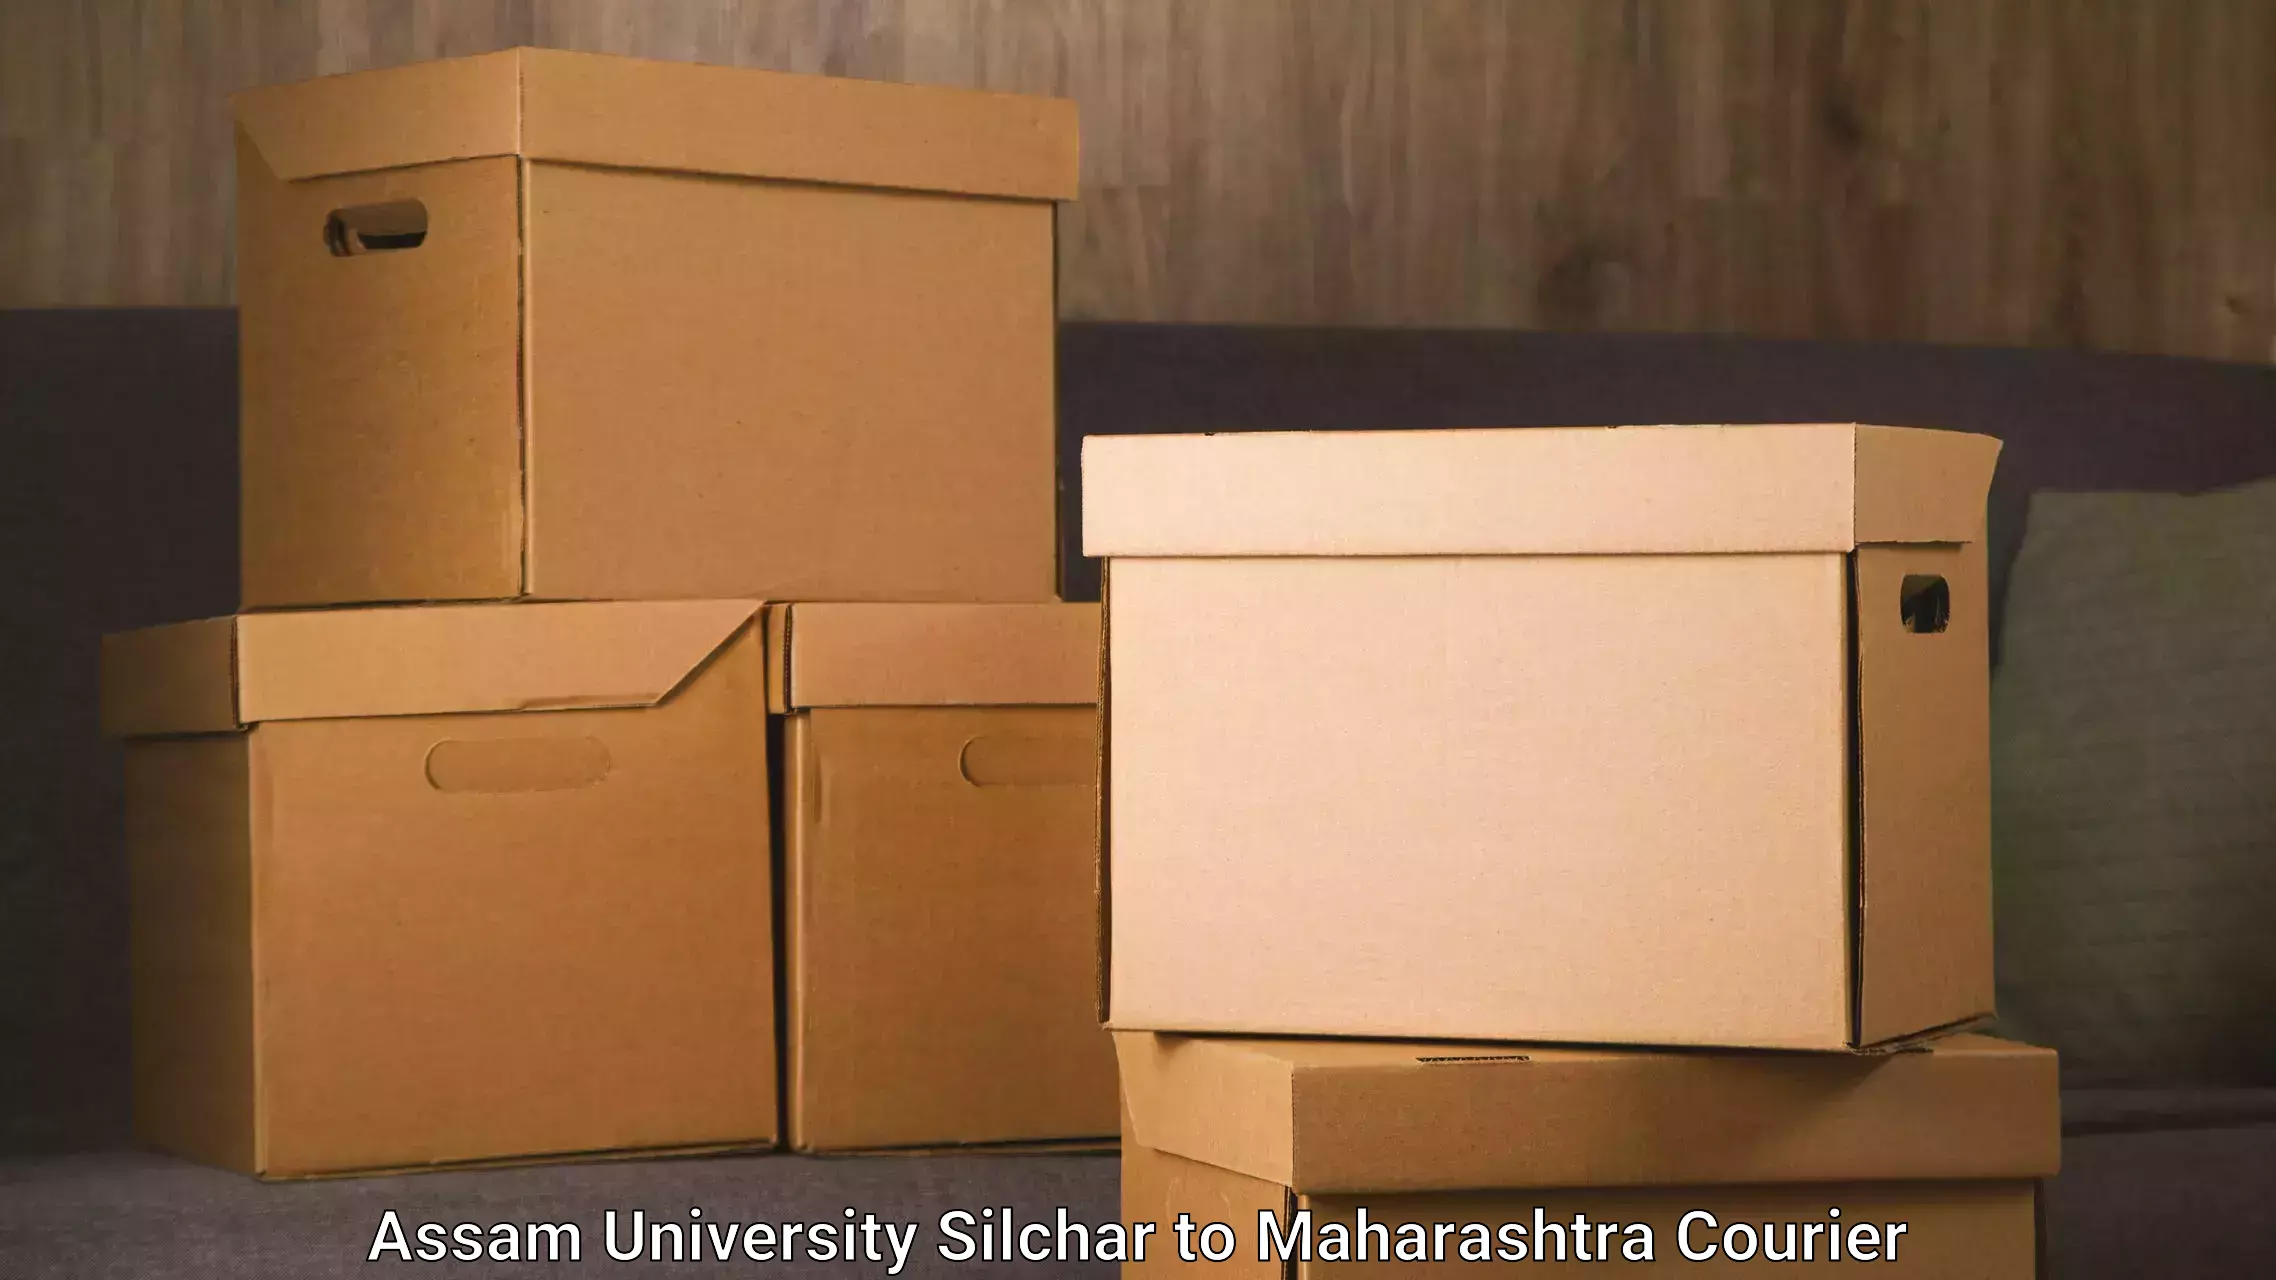 Residential courier service Assam University Silchar to Lonere